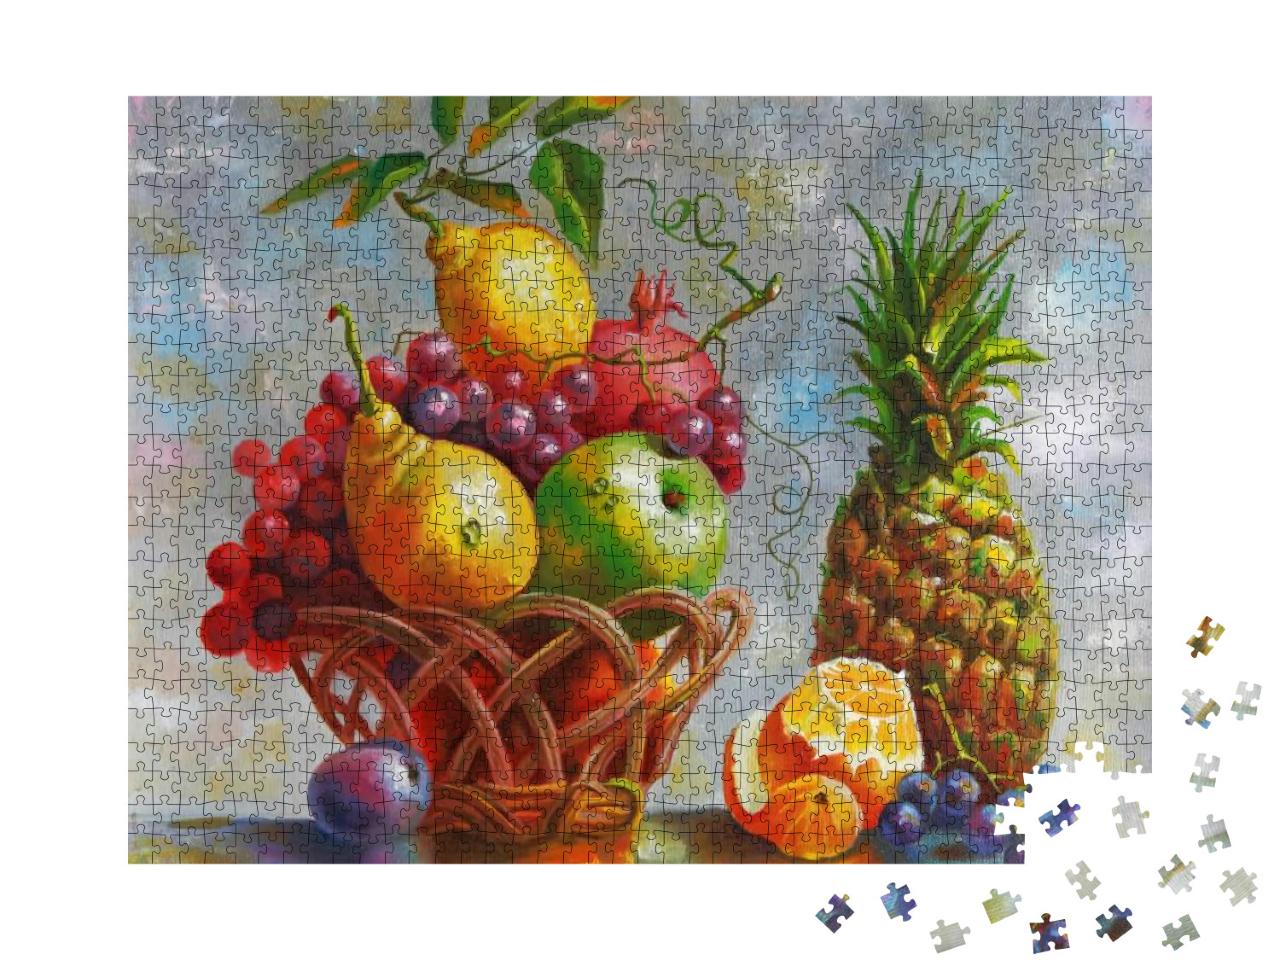 Artwork. Still Life with Pineapple. Painting Canvas, Oil... Jigsaw Puzzle with 1000 pieces